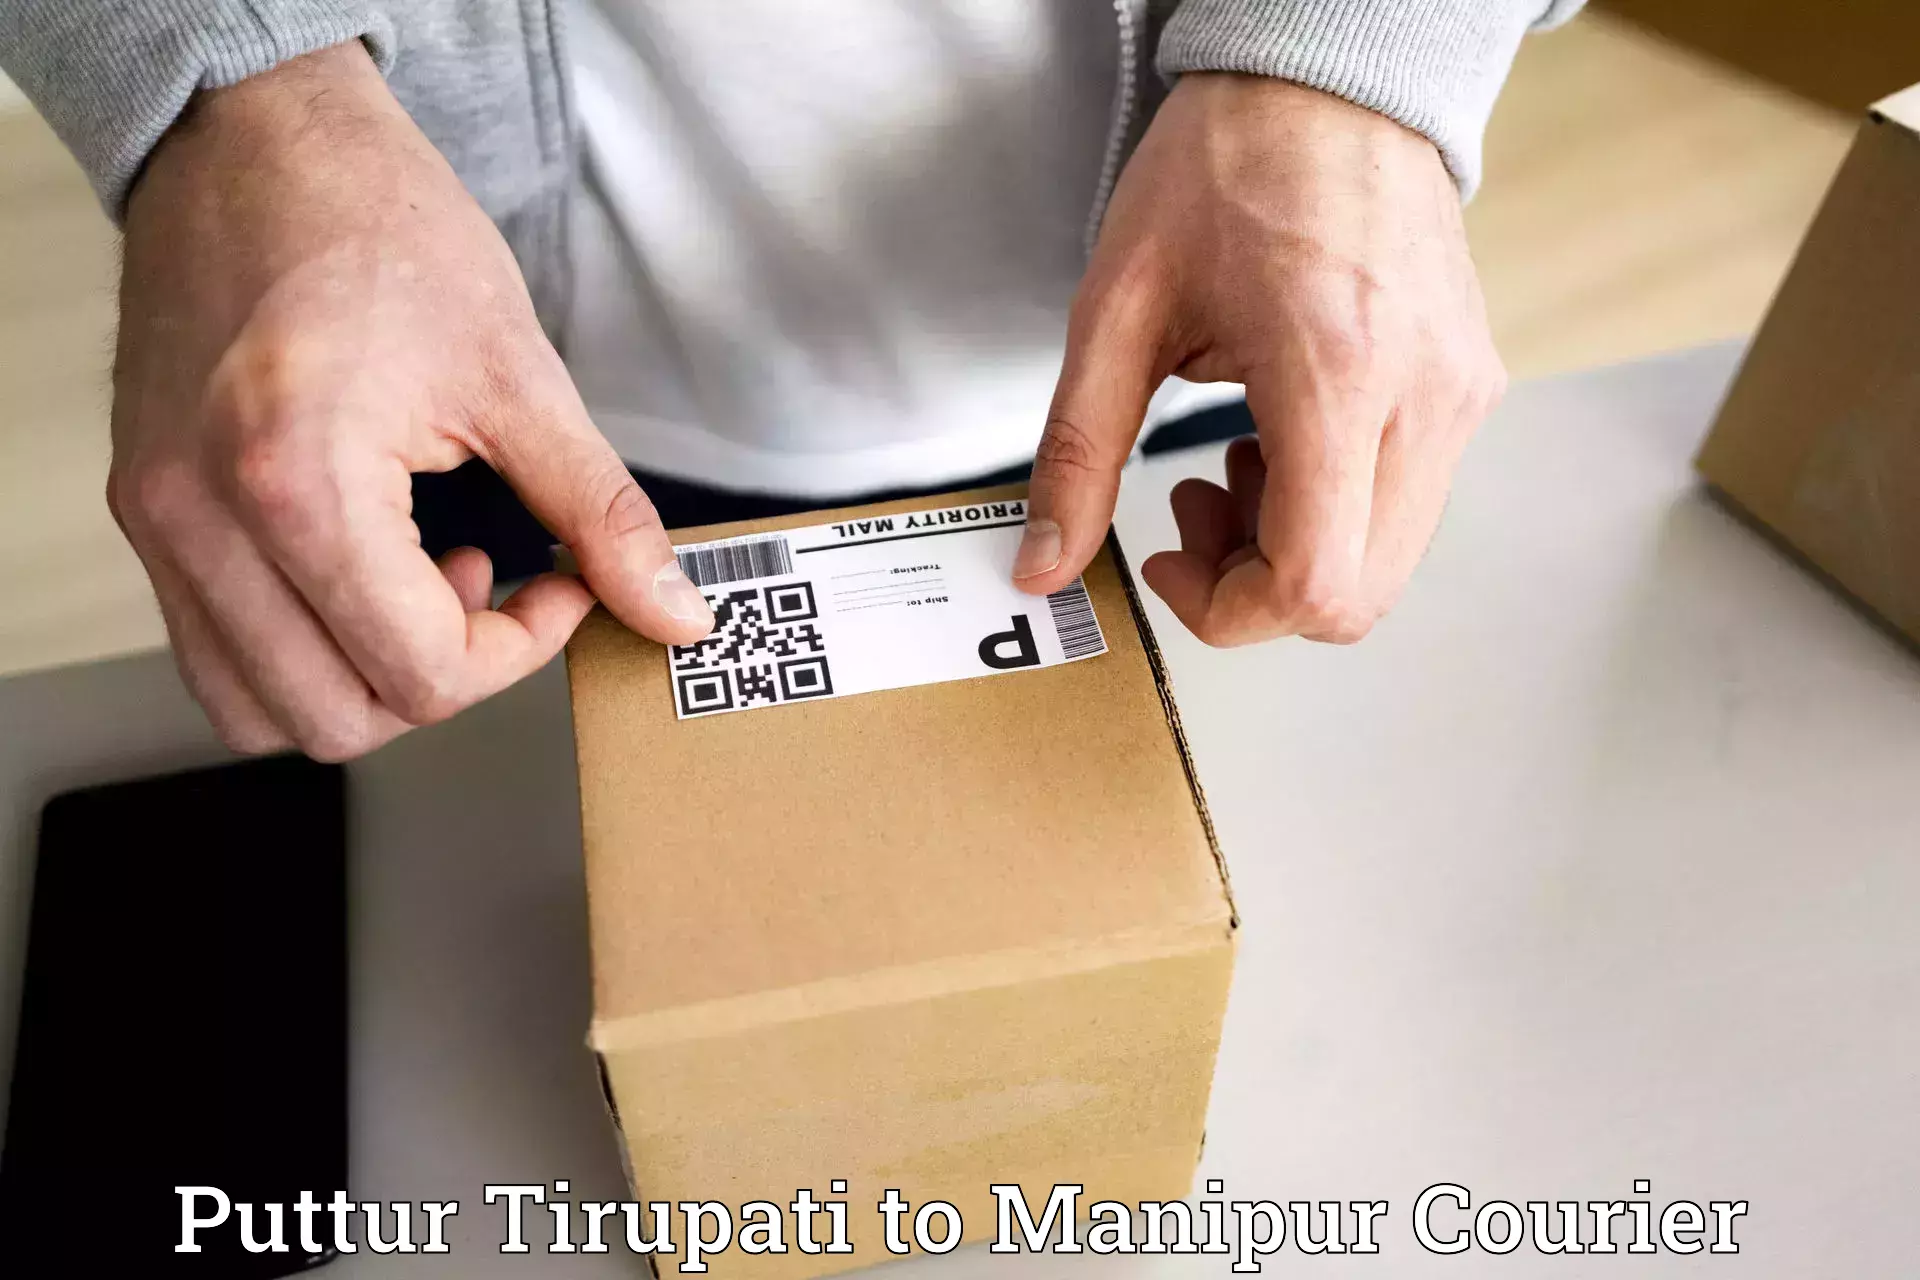 Large package courier Puttur Tirupati to Manipur